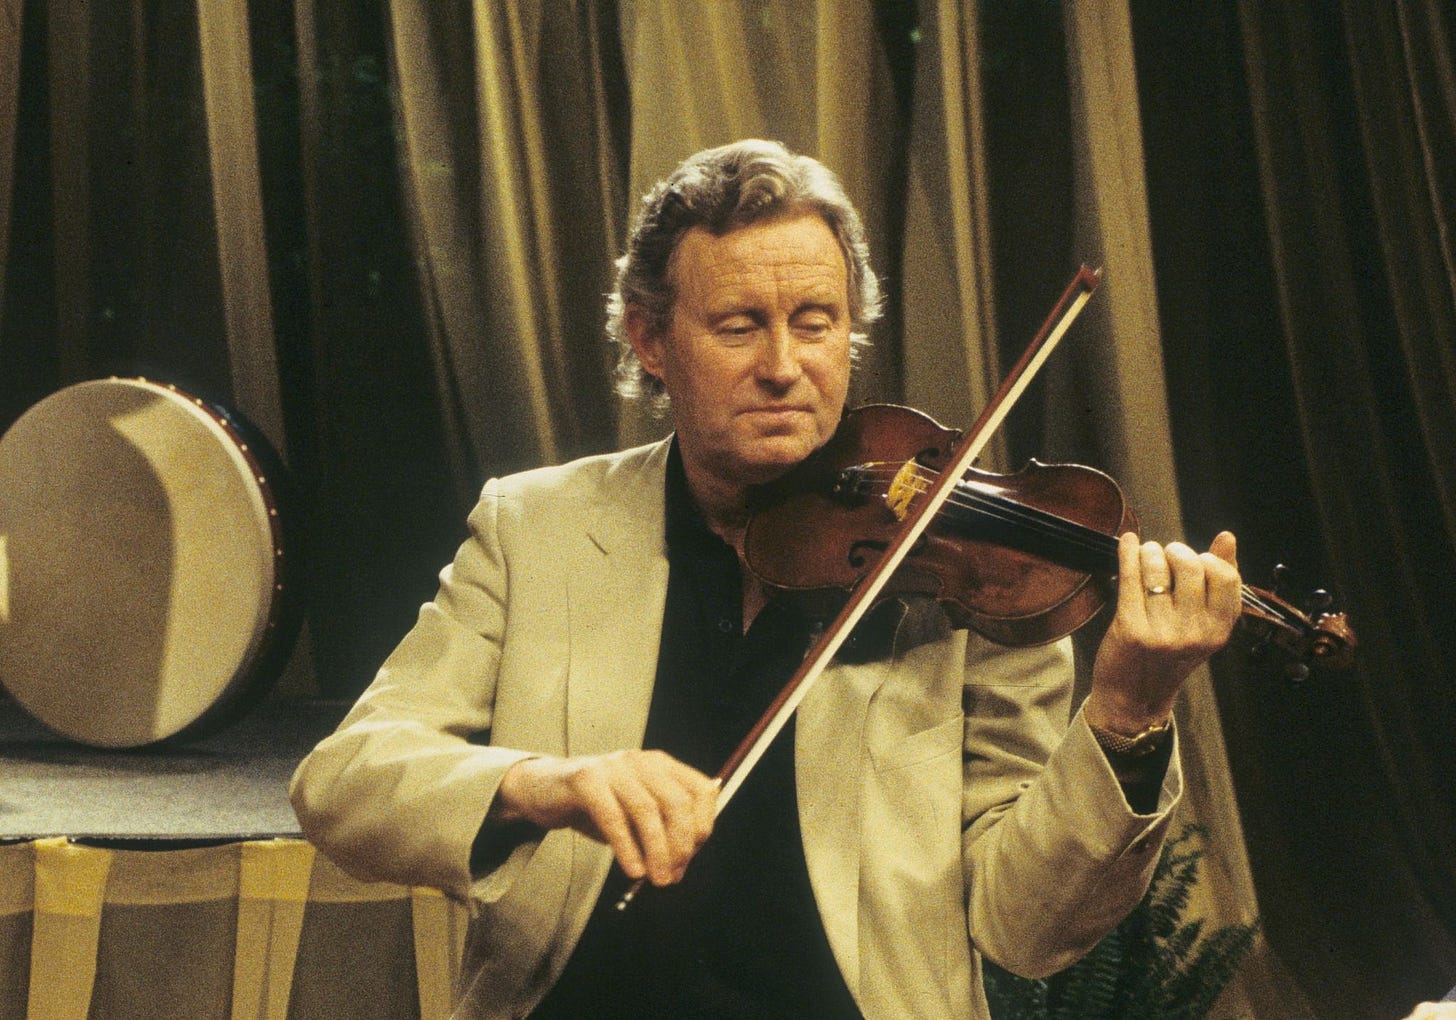 Seán Keane performing the violin with the Chieftains in Chicago in 1999